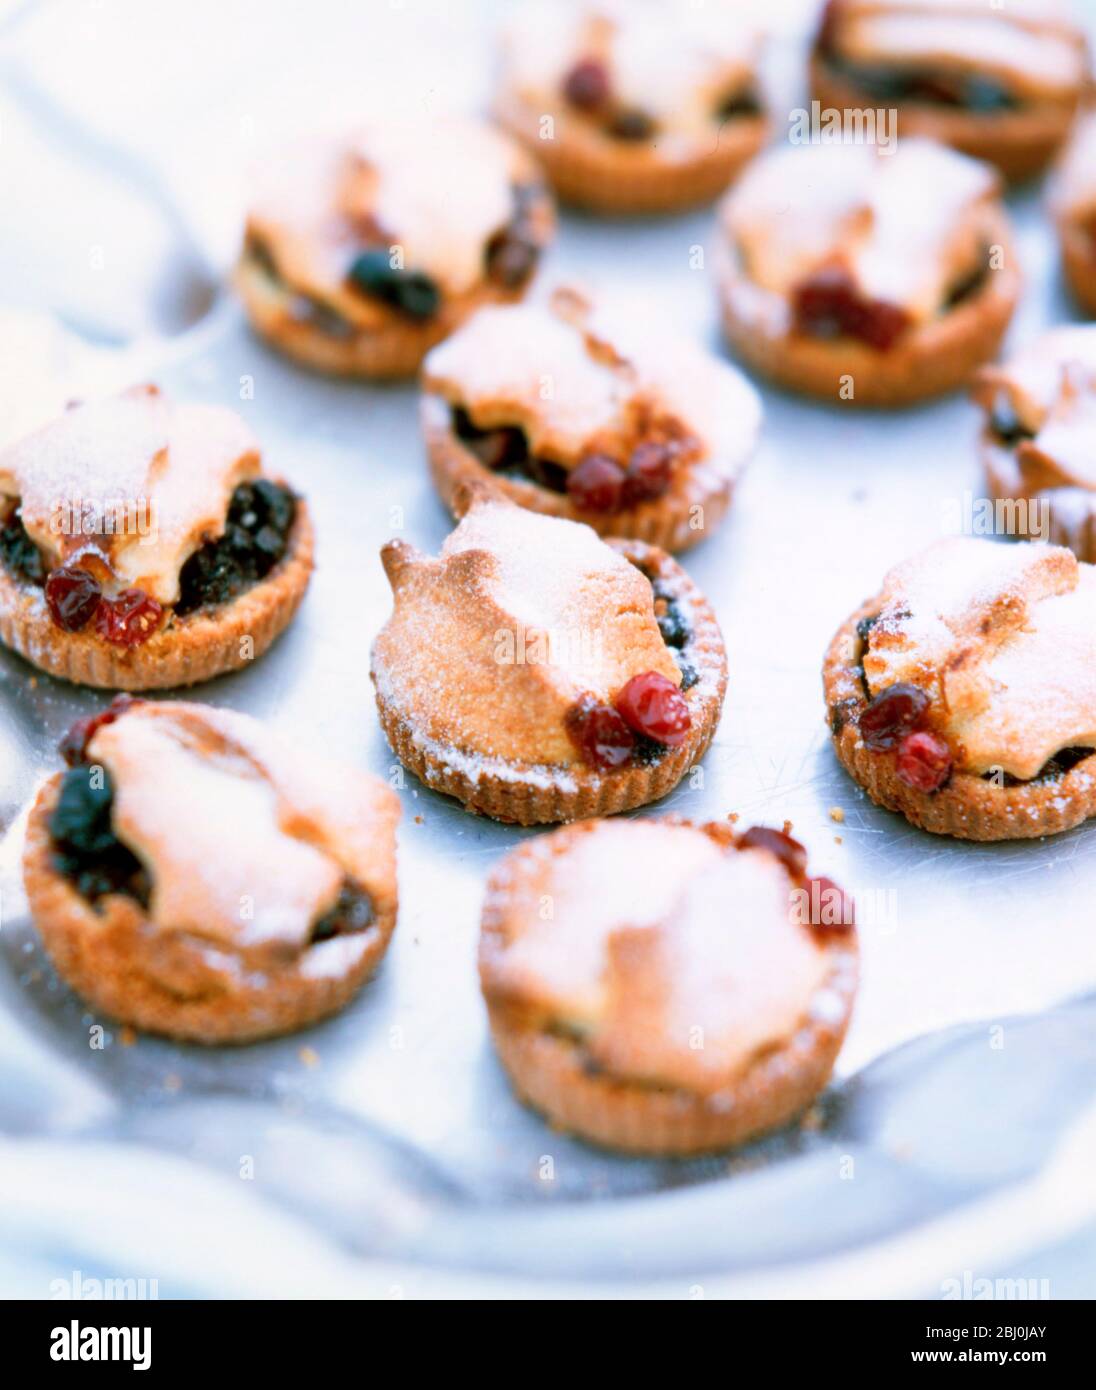 Little mince pies decorated with pastry holly leaves and cranberries dusted with icing sugar, on metal tray - Stock Photo